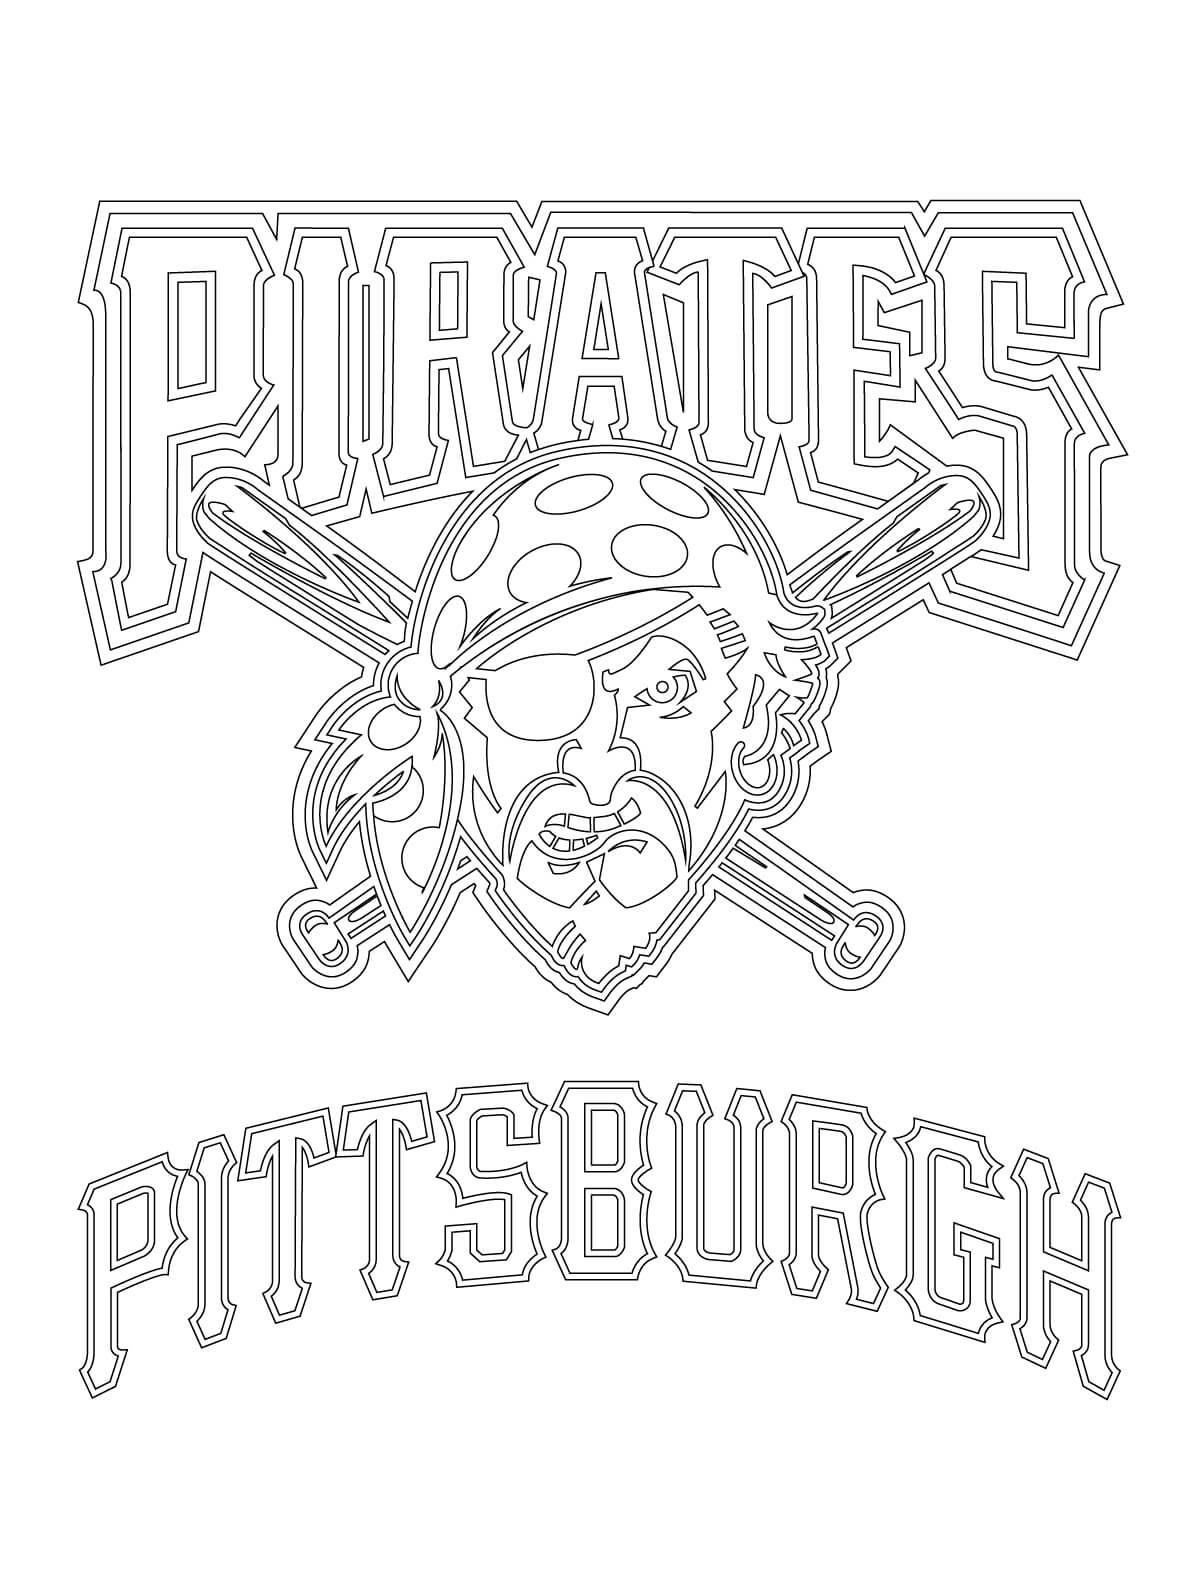 pittsburgh pirates coloring pages